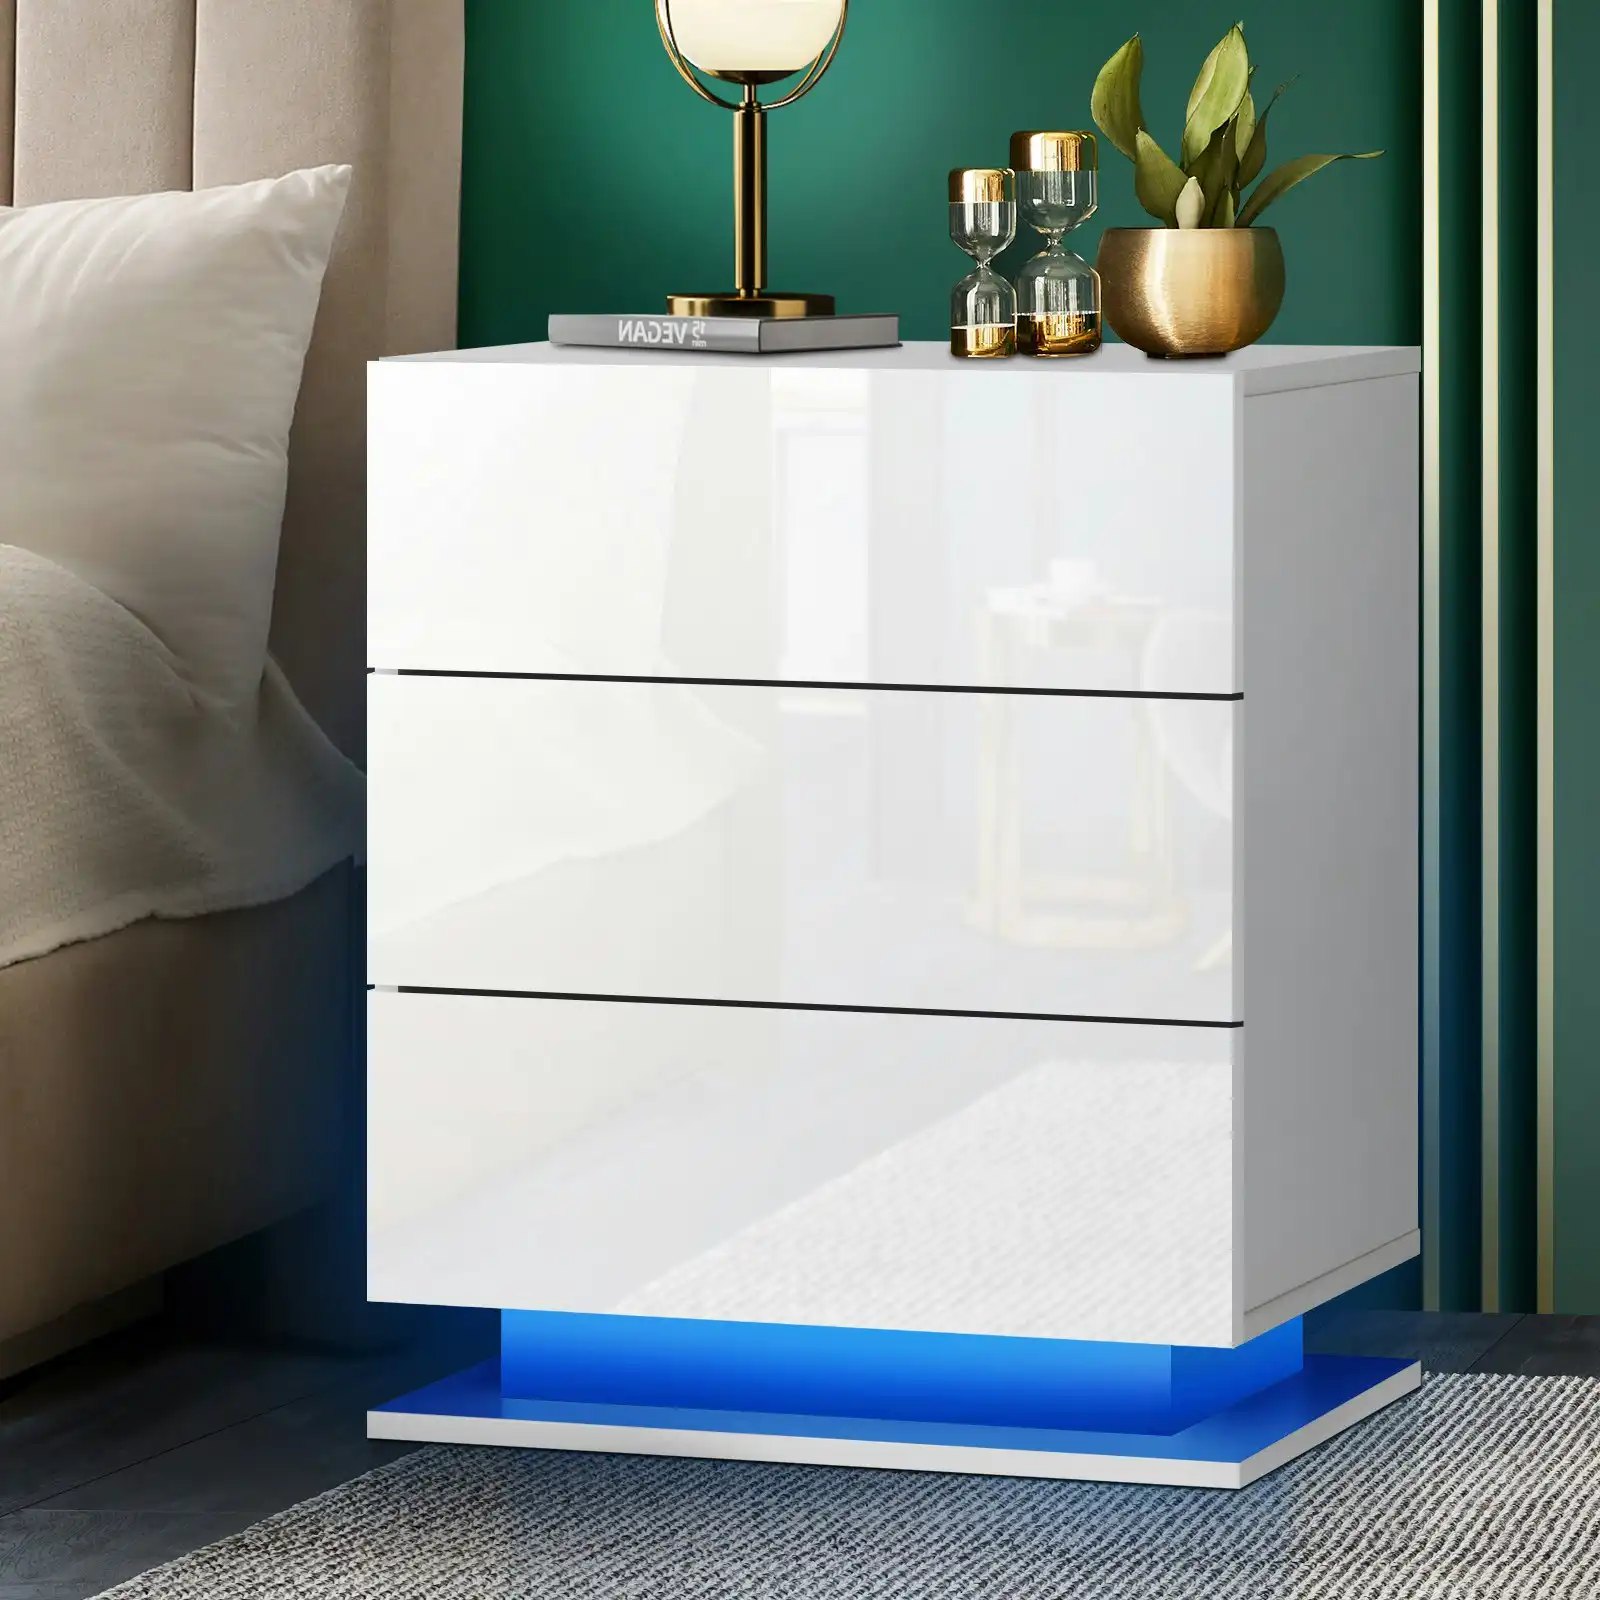 Oikiture Bedside Table RGB LED Nightstand Cabinet 3 Drawers White Side Table Furniture